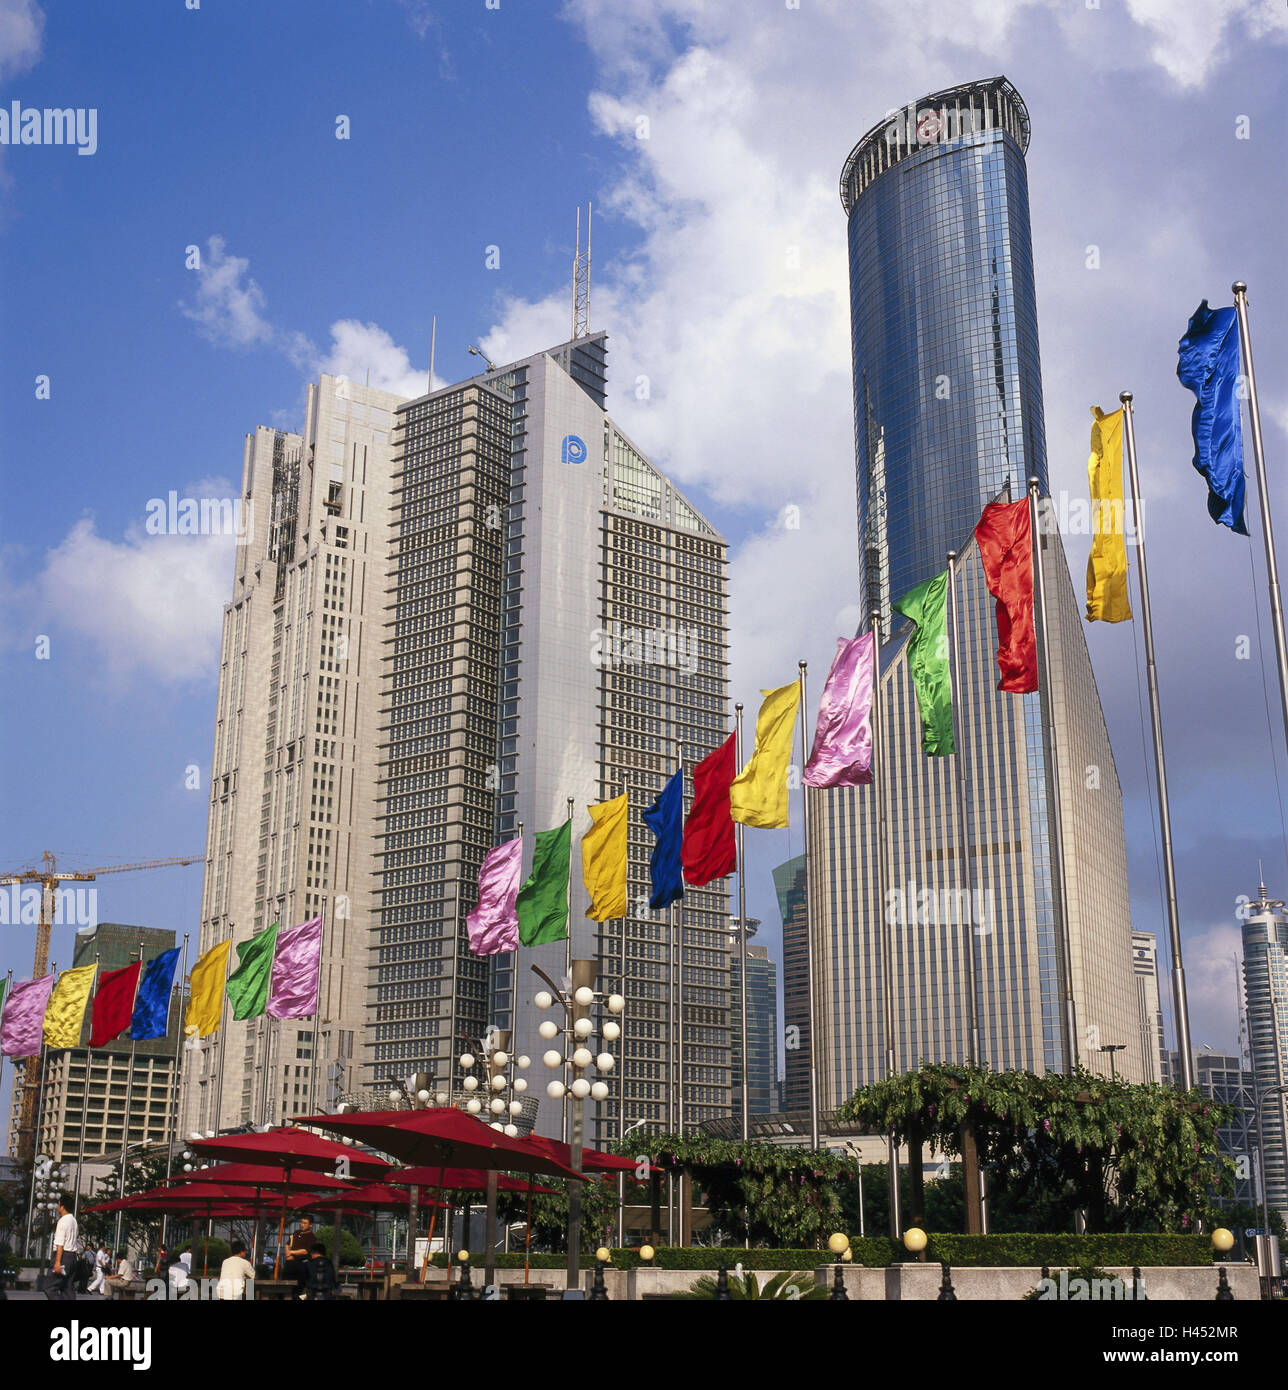 China, Shanghai, town fourth Pudong, skyscraper, street cafe, Asia, cosmopolitan city, city, town, town view, structures modern, architecture, business premises, high rises, office buildings, flags, flags, brightly, street restaurant, passer-by, Stock Photo